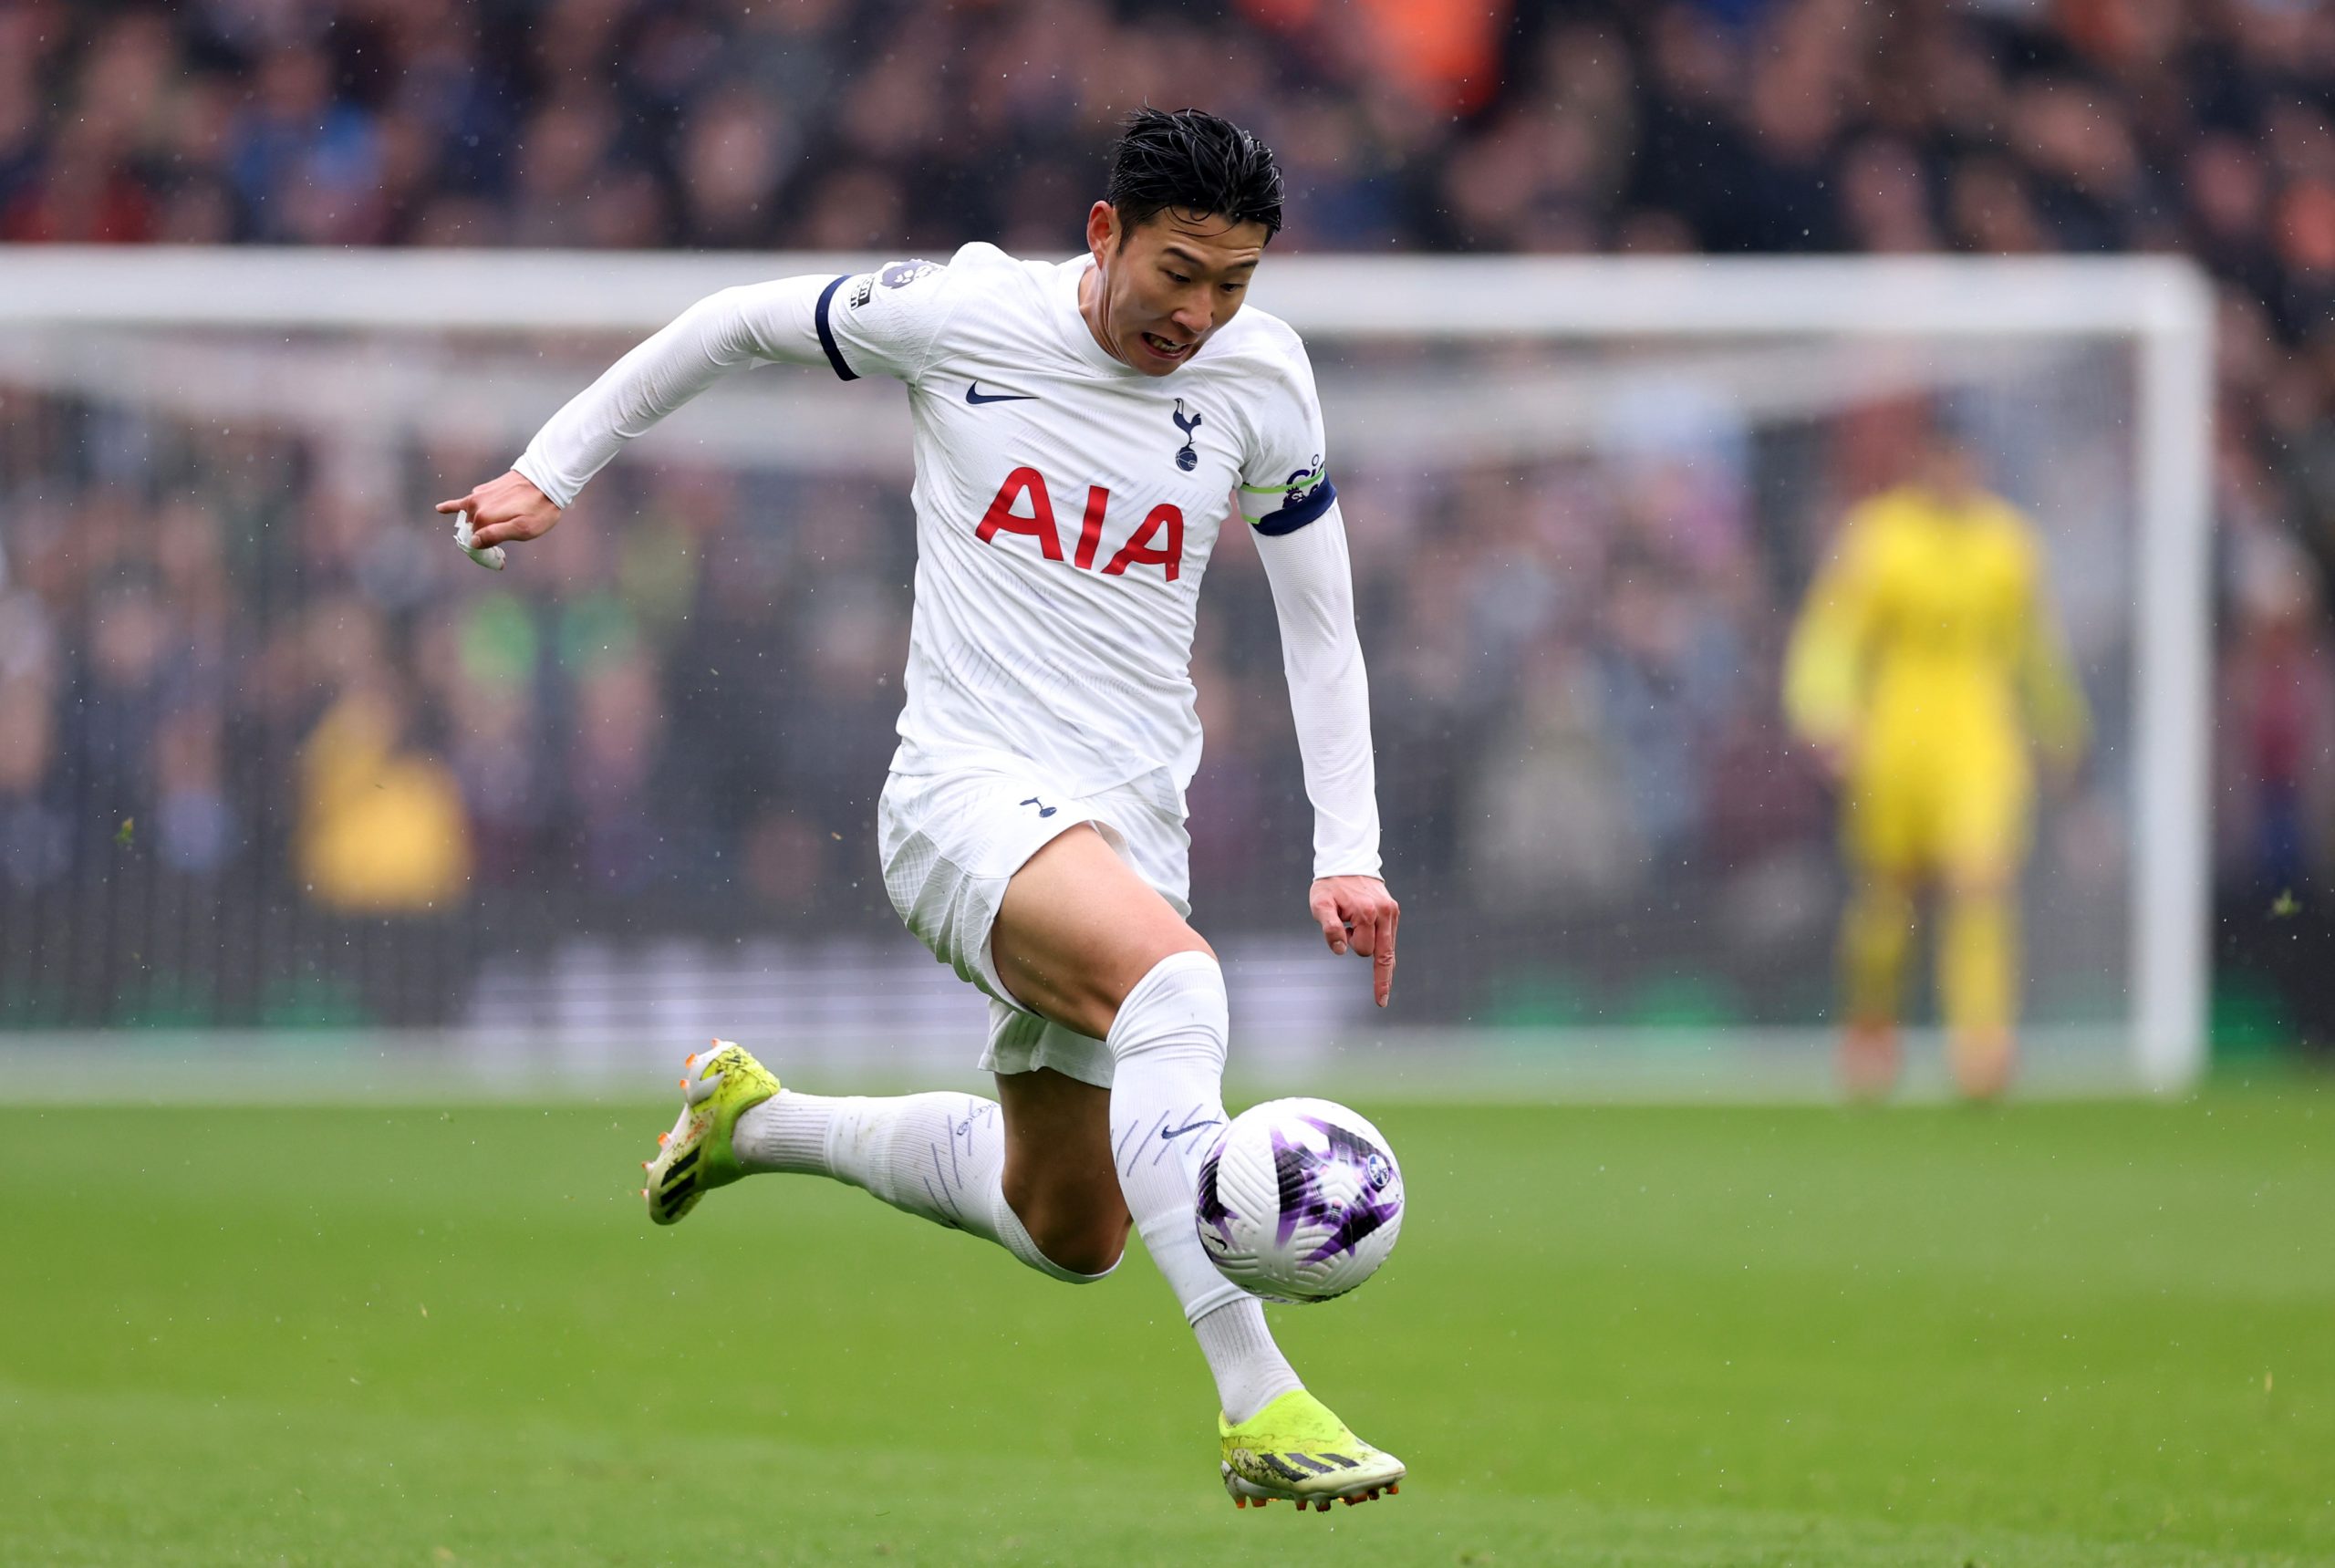 Son Heung-min calls for unity amongst Tottenham squad amidst adverse times